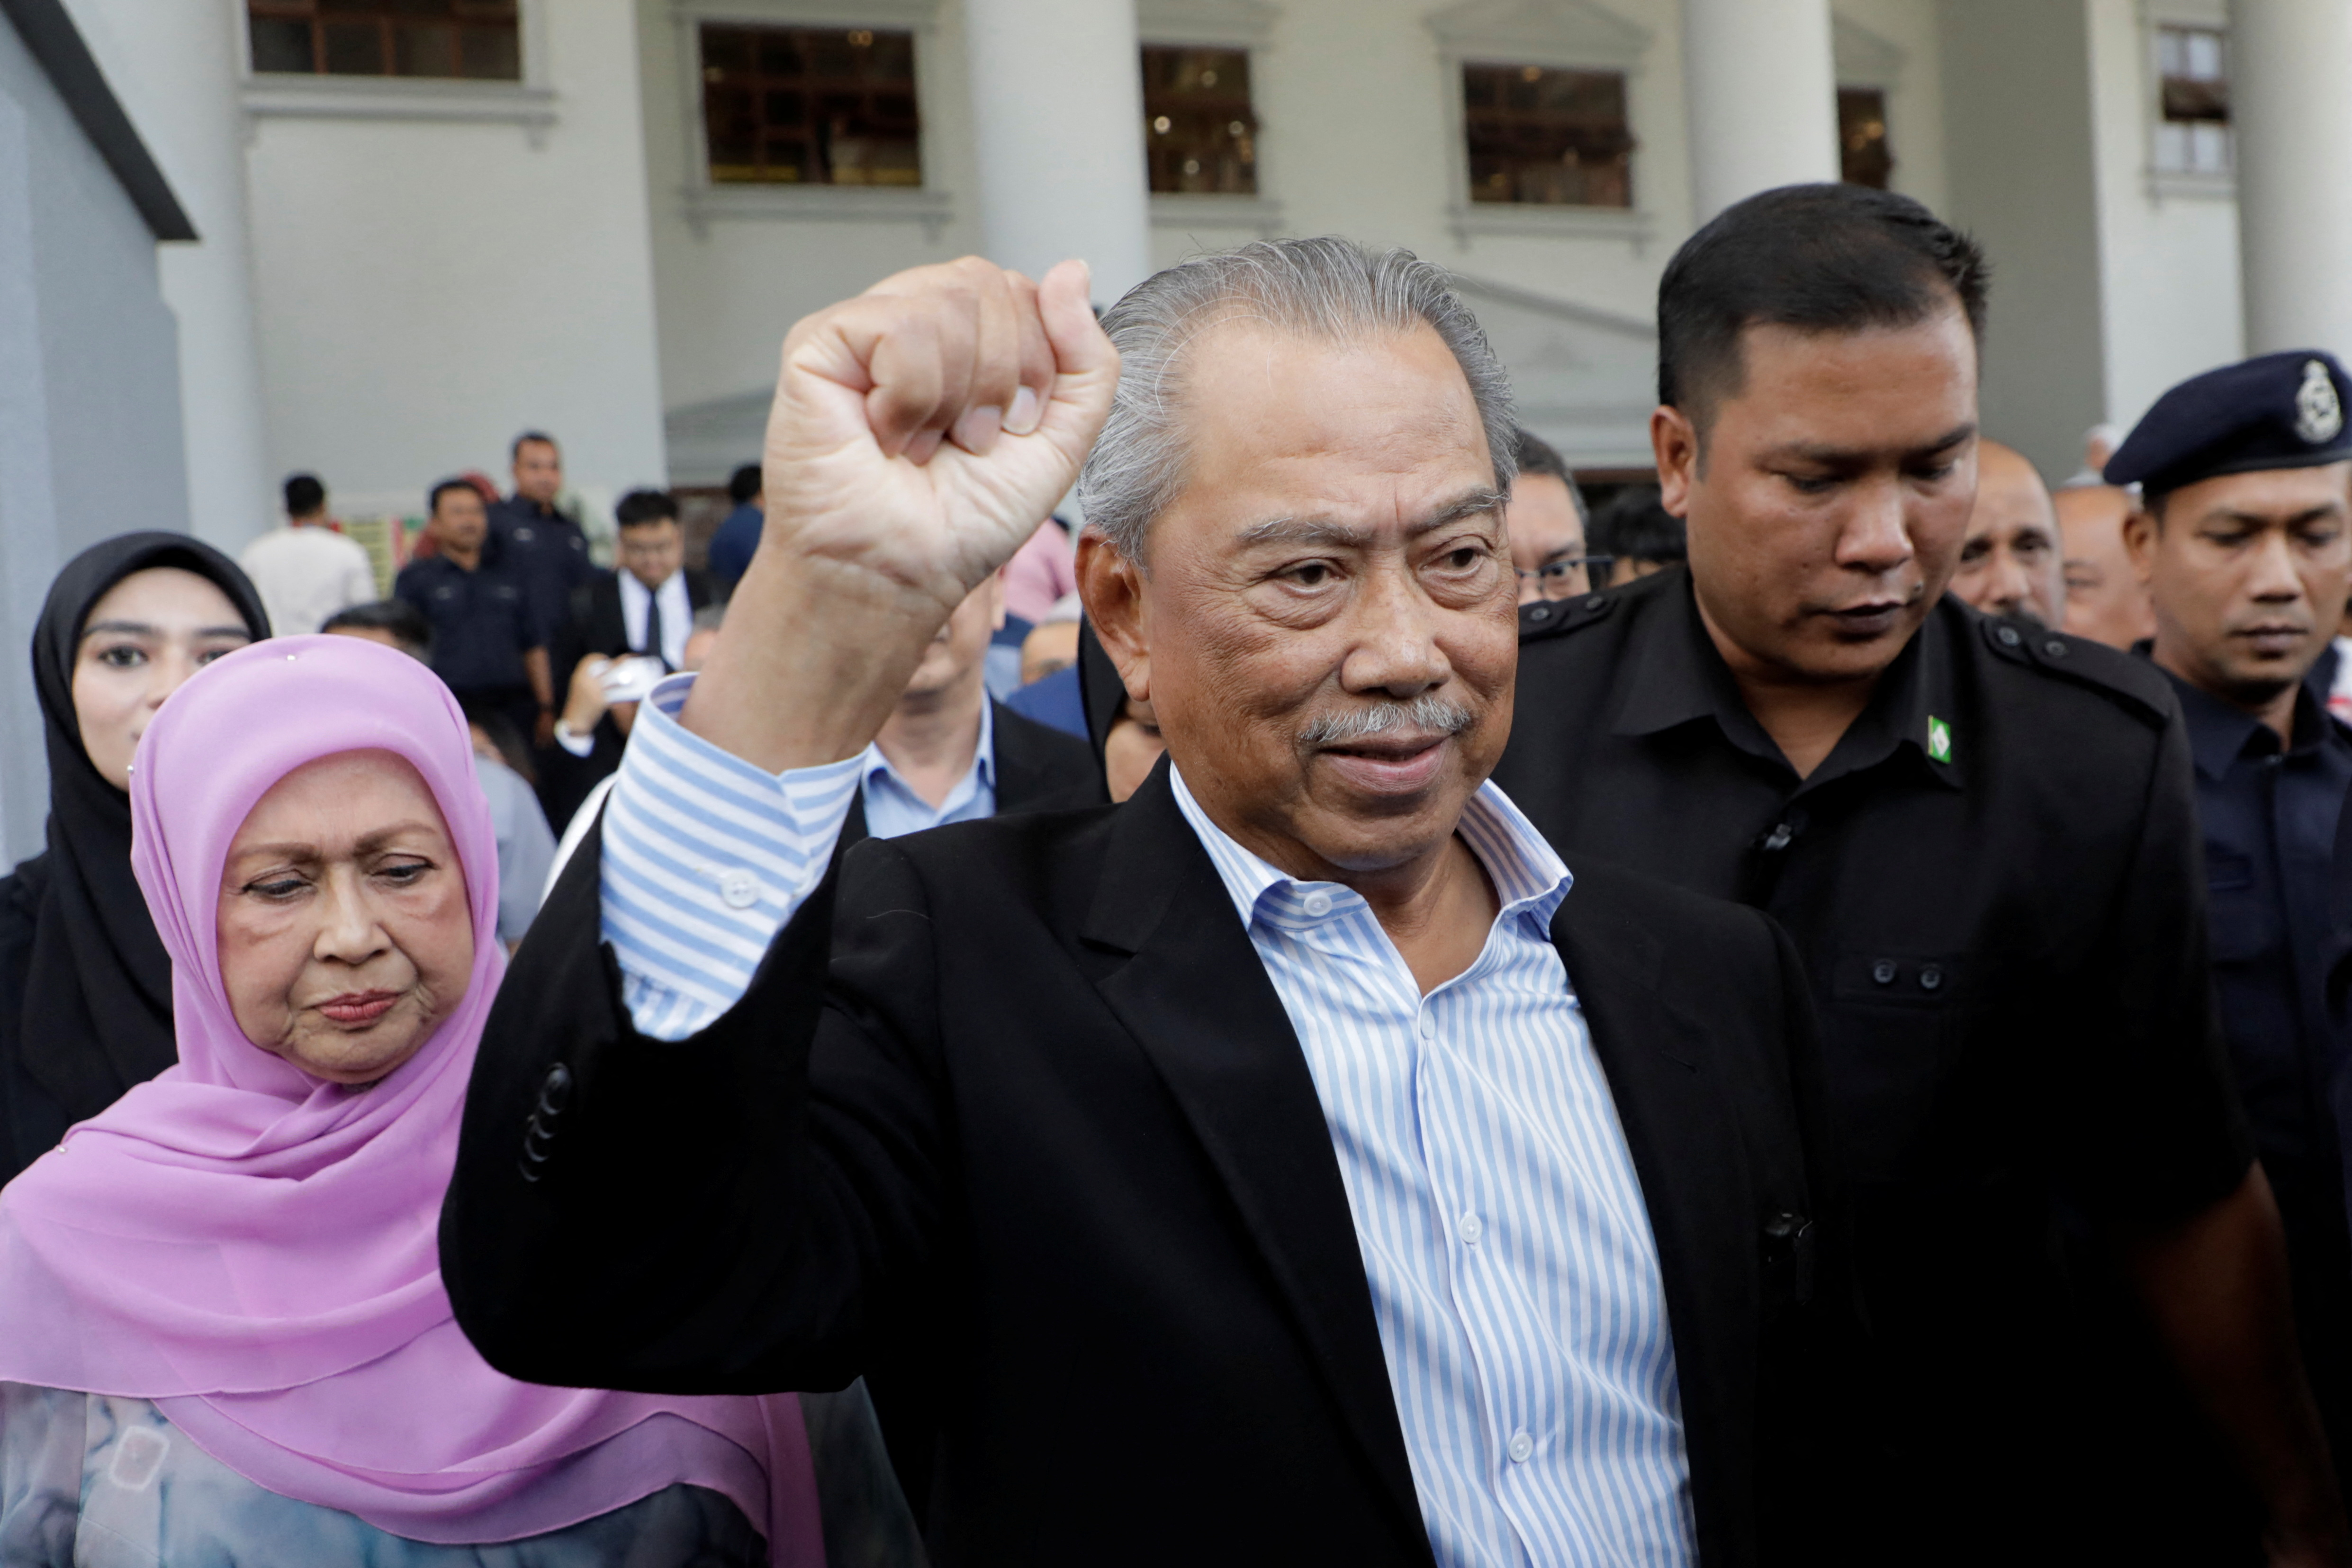 Analysis With another ex-prime minister charged, Malaysia risks further turmoil Reuters image